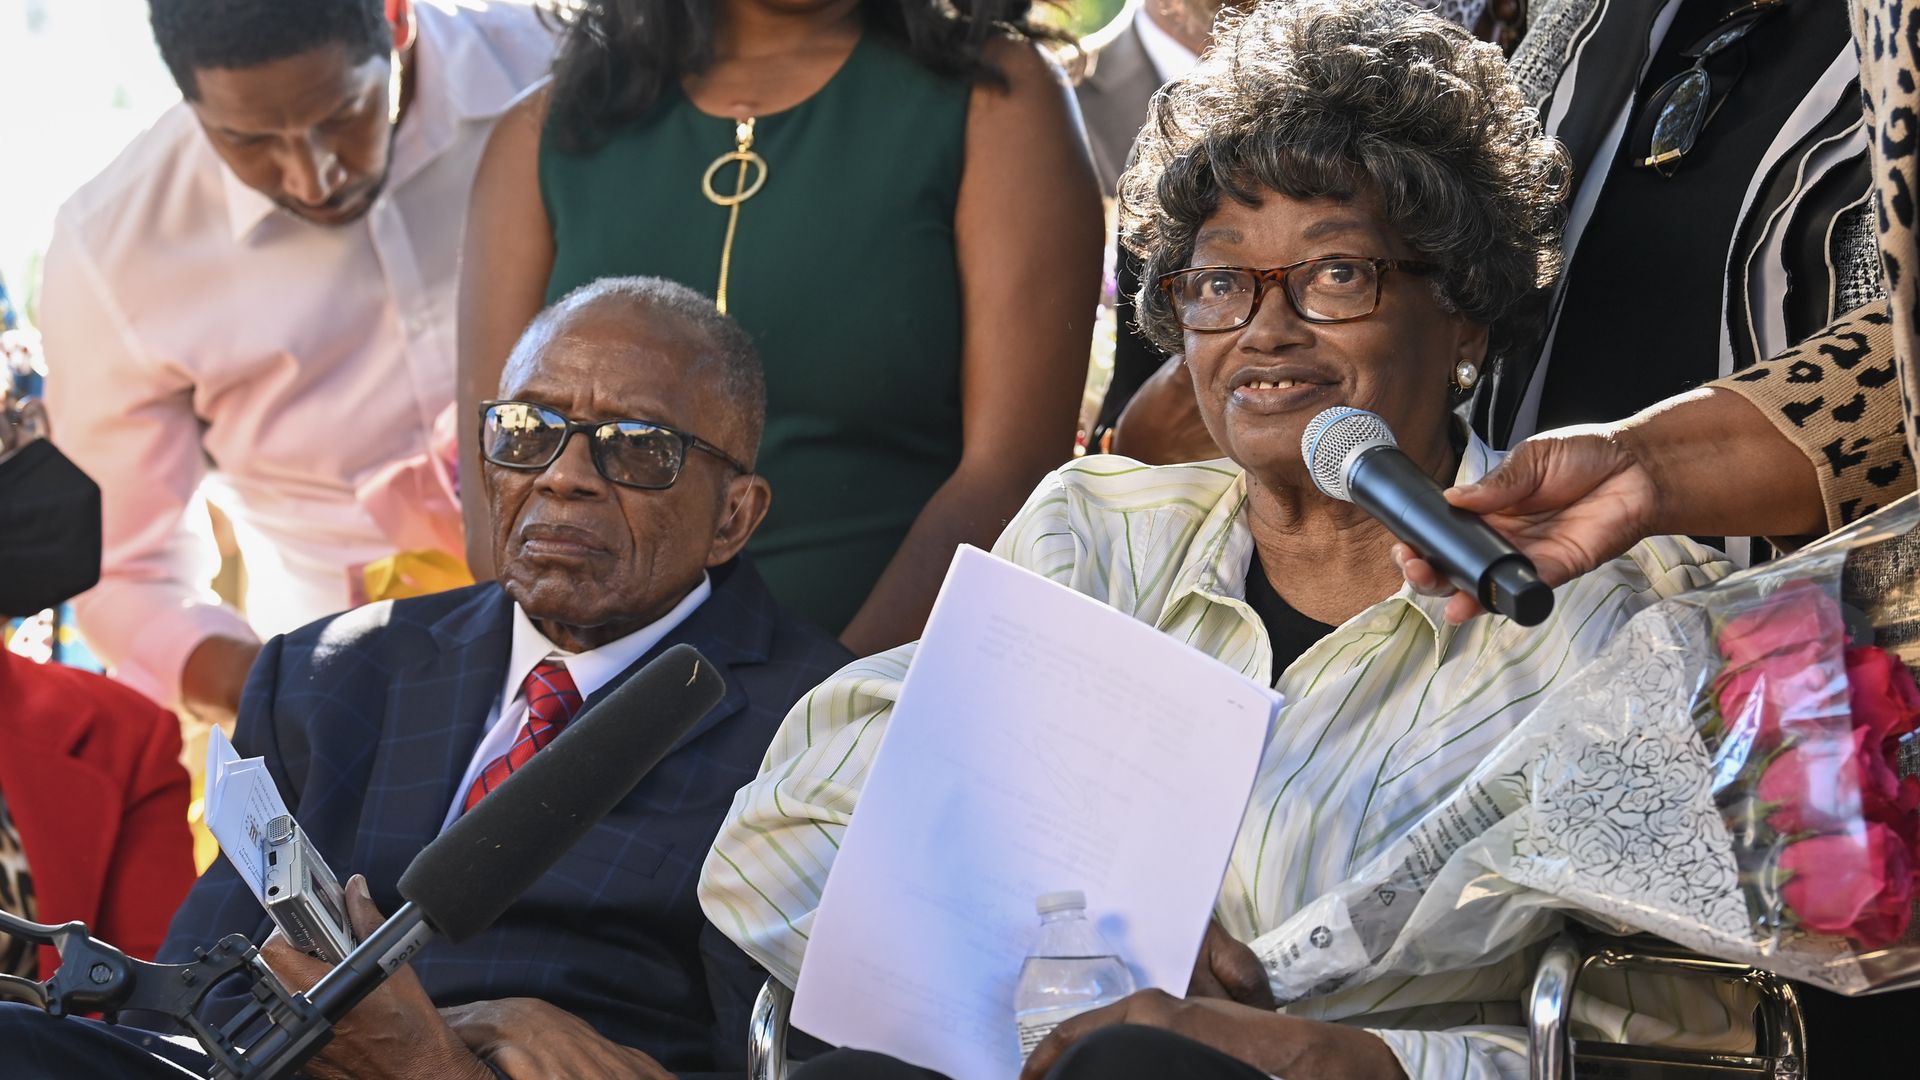  Claudette Colvin, 82, speaks alongside Civil rights attorney Fred Gray, left, during a press conference at the Montgomery County Family Court on October 26, 2021, in Montgomery, Alabama